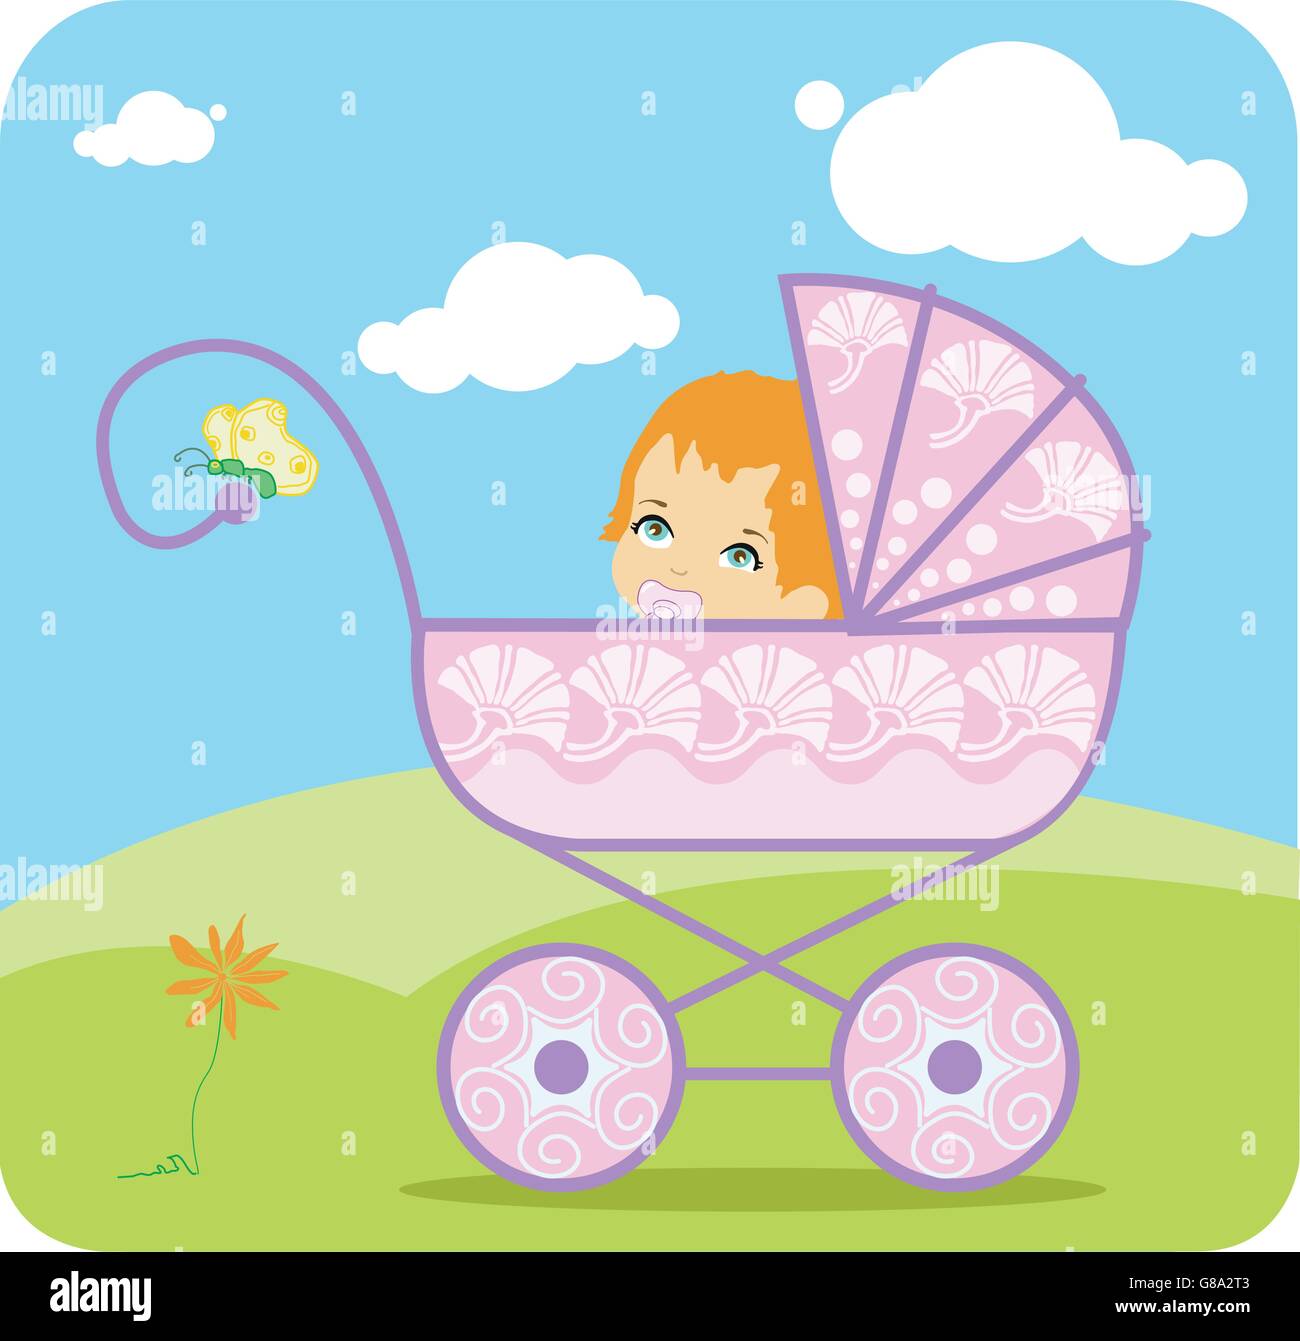 Baby peeking out from a baby carriage Stock Vector